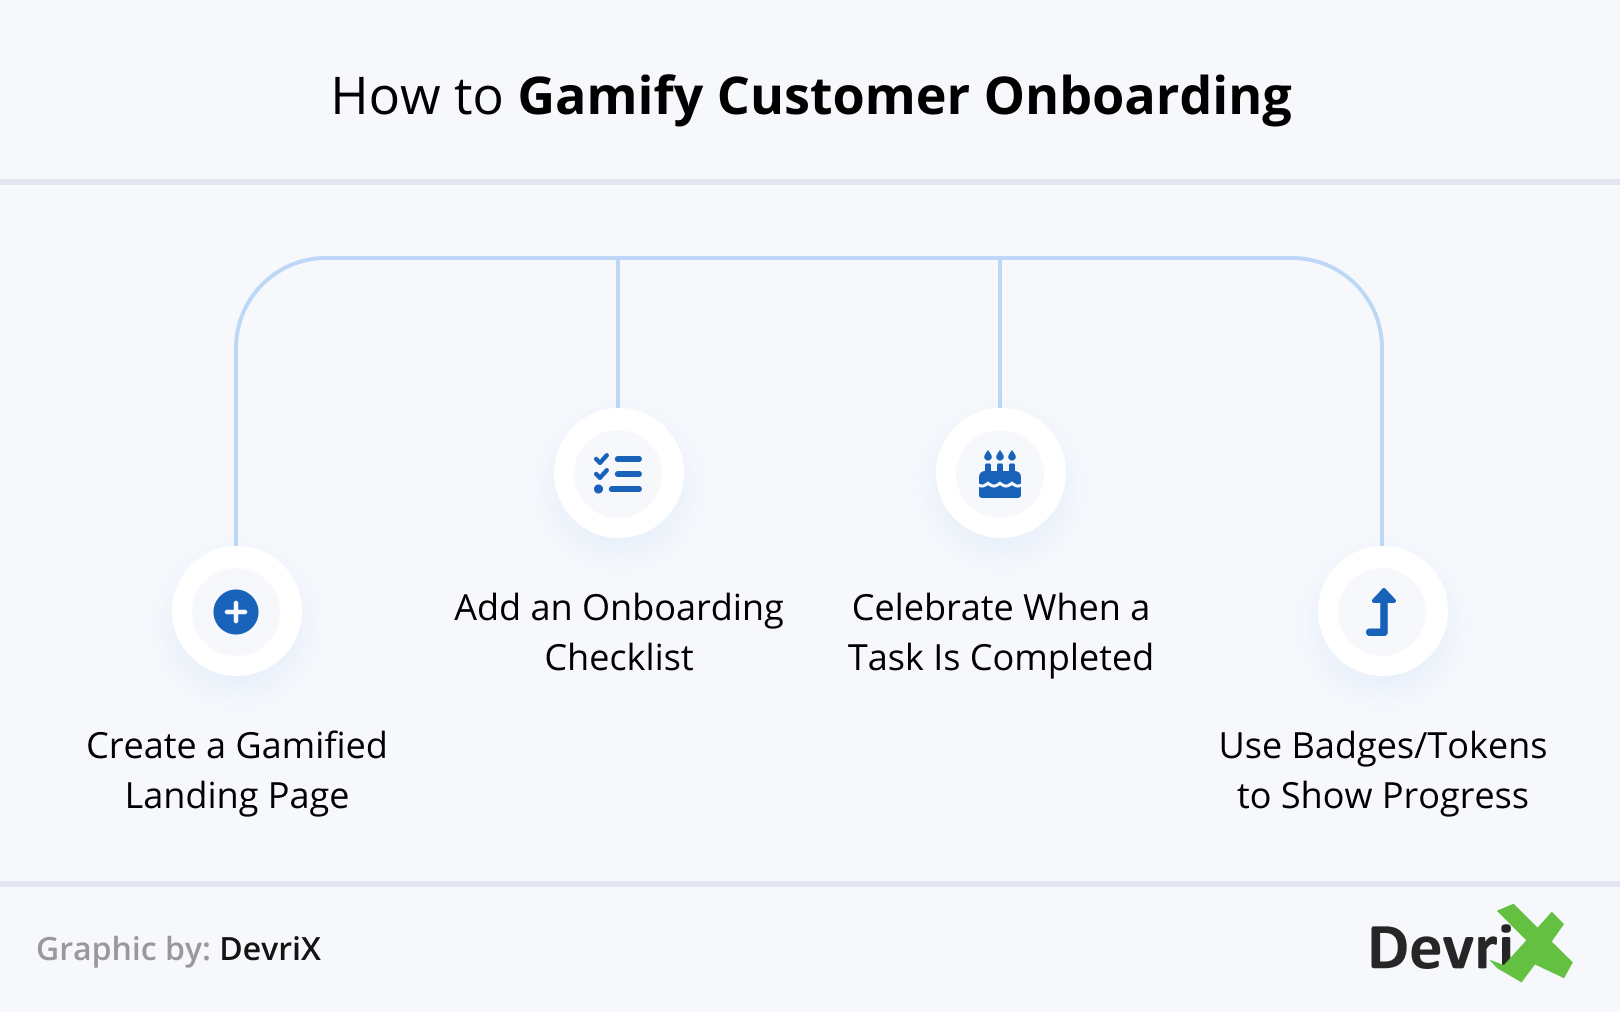 How to Gamify Customer Onboarding